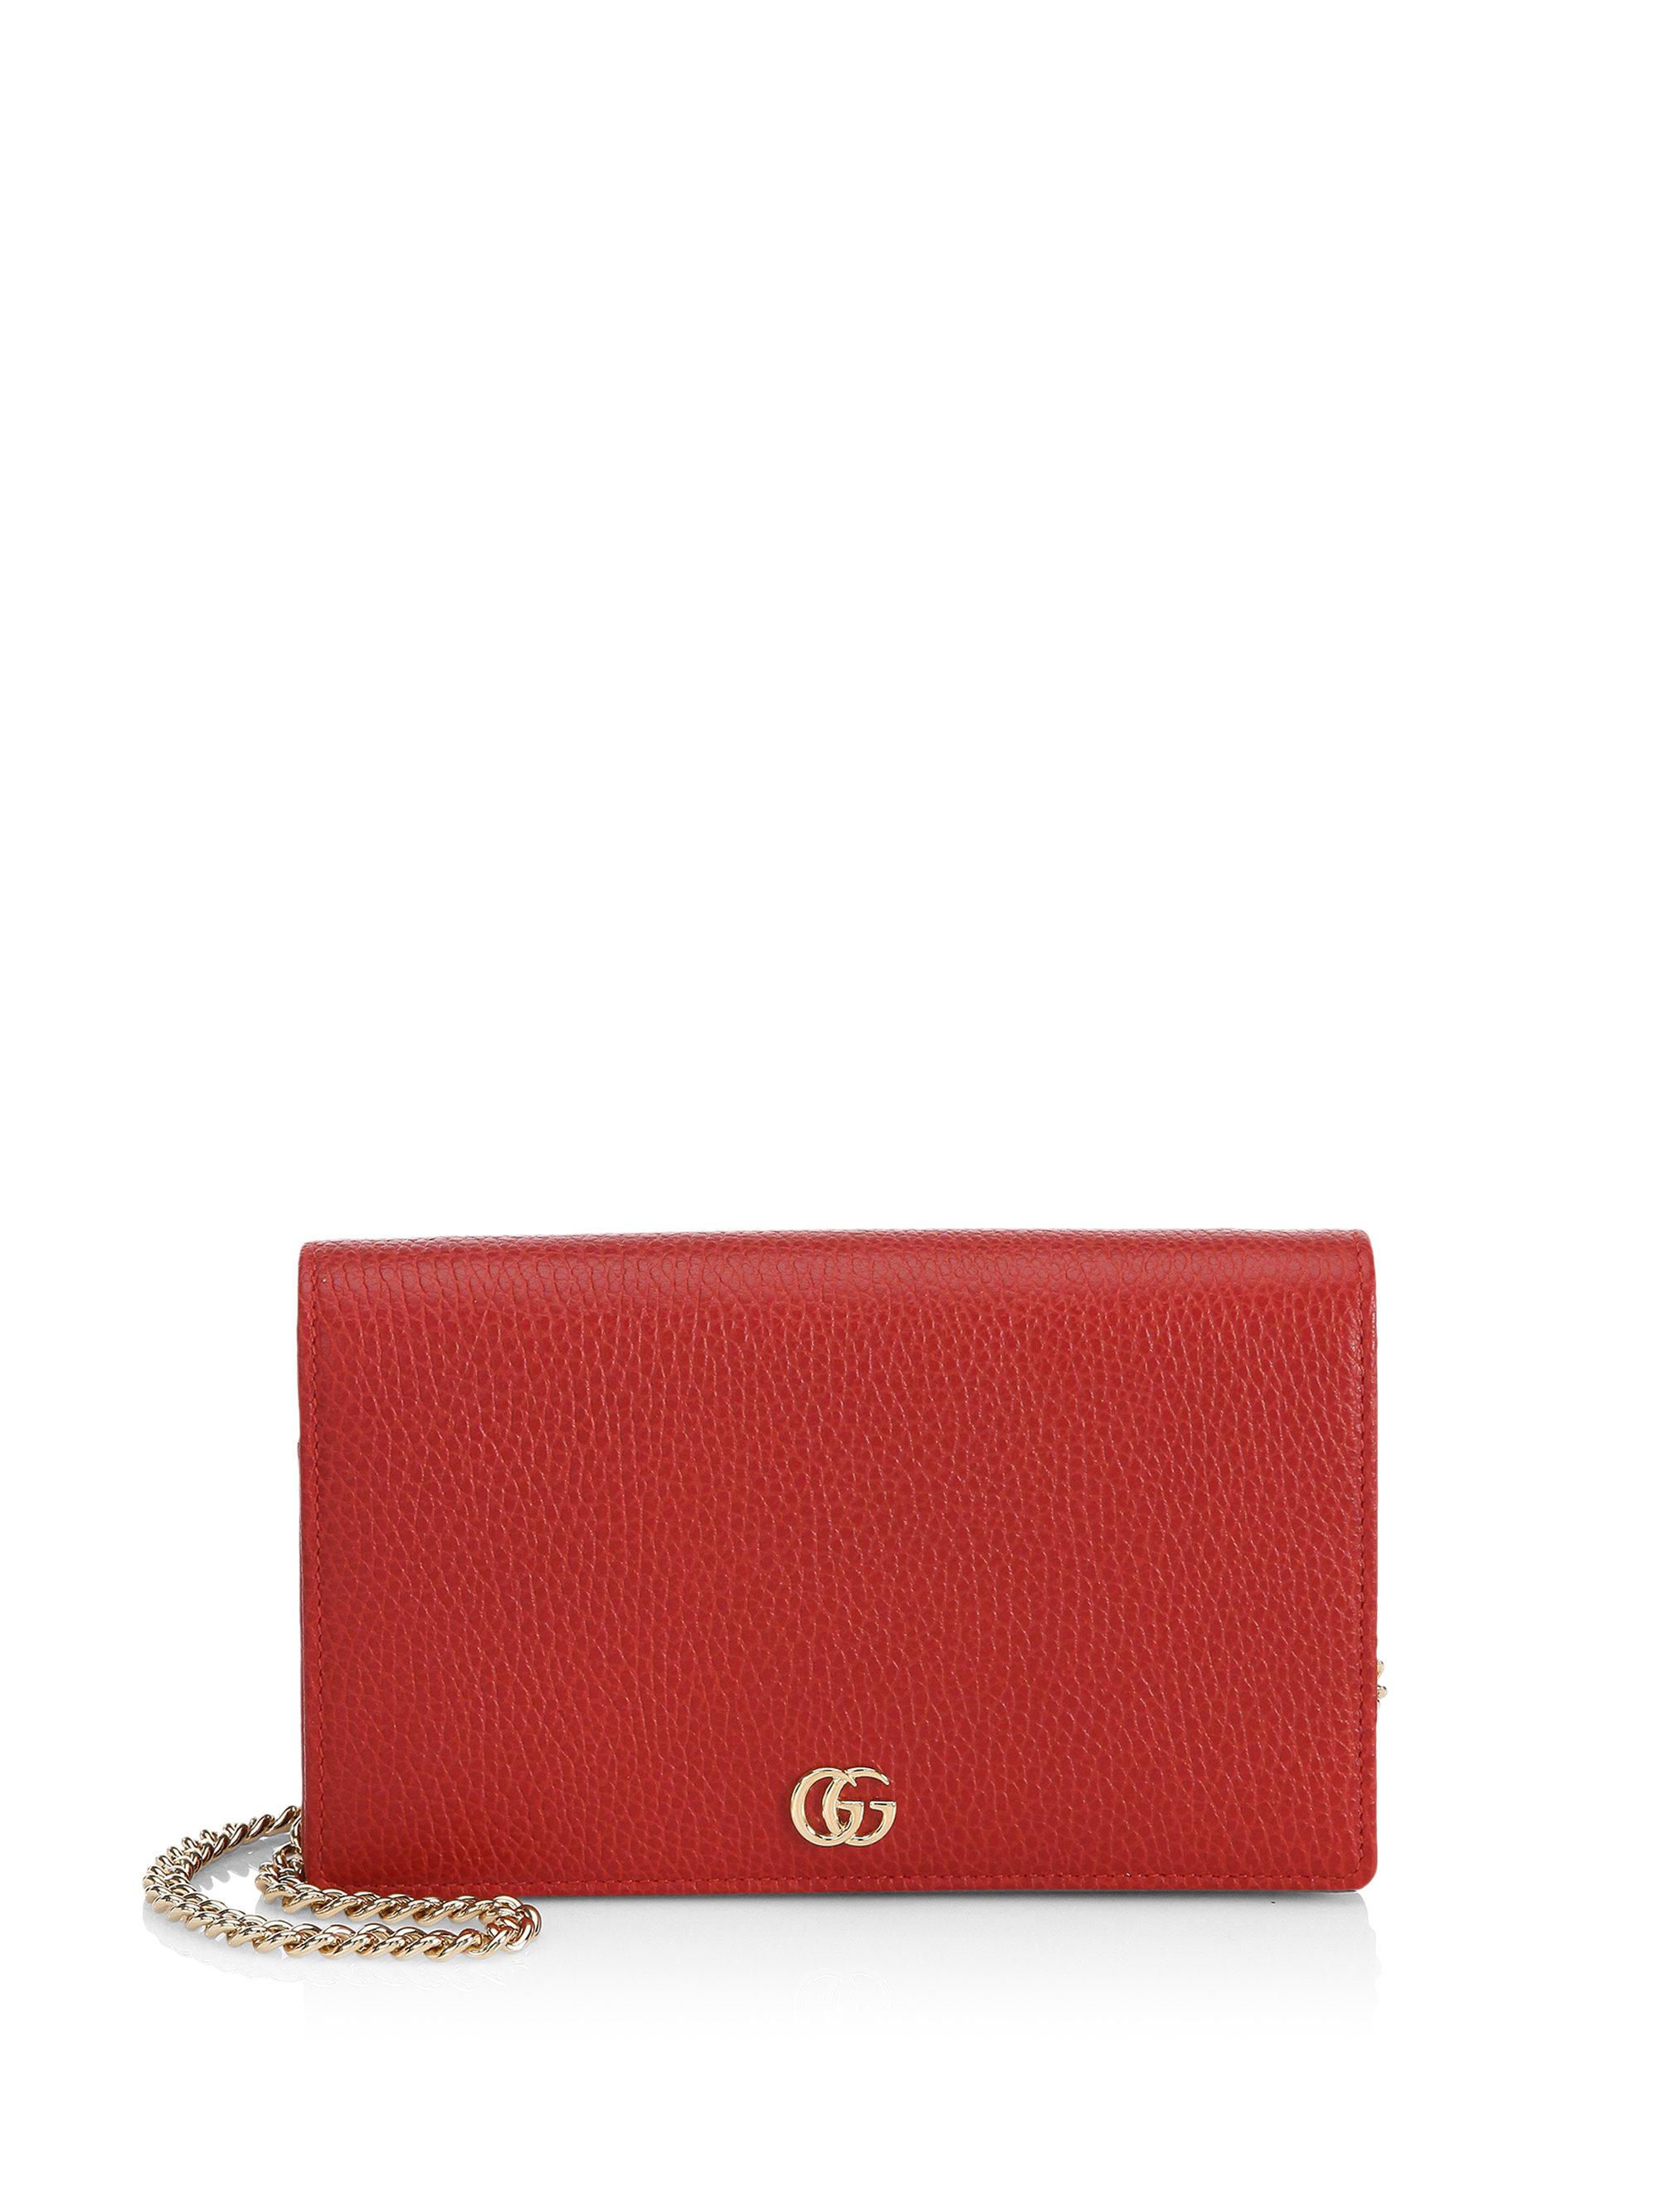 Lyst - Gucci Petite Marmont Wallet On Chain in Red